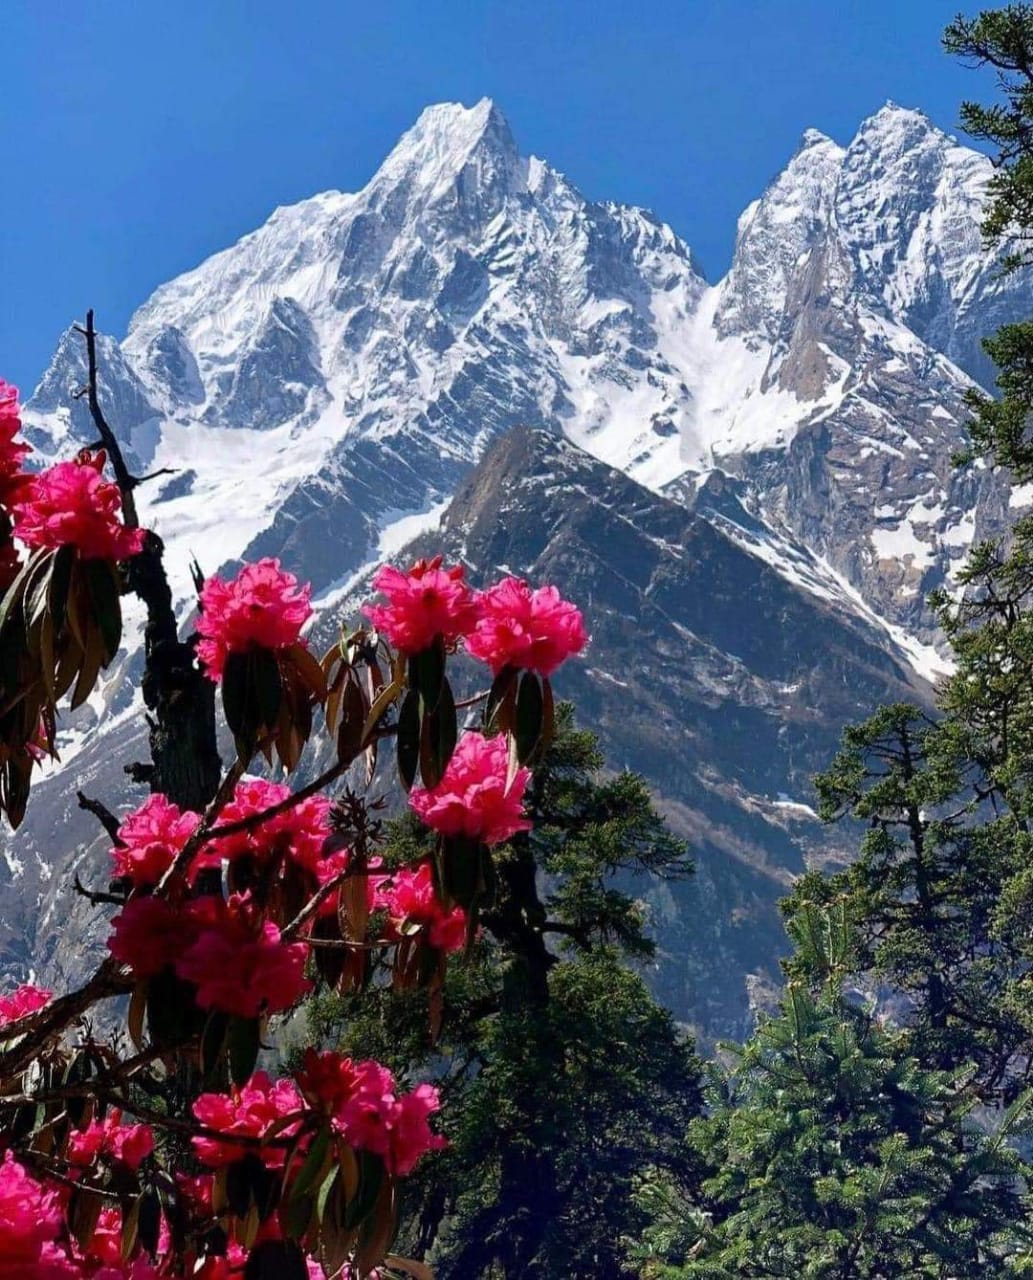 Uttarakhand’s topography is challenging, with the mountainous state of Himachal Pradesh to the Northwest, Tibet to the Northeast, Nepal in the Southeast and the state of Uttar Pradesh in the South.